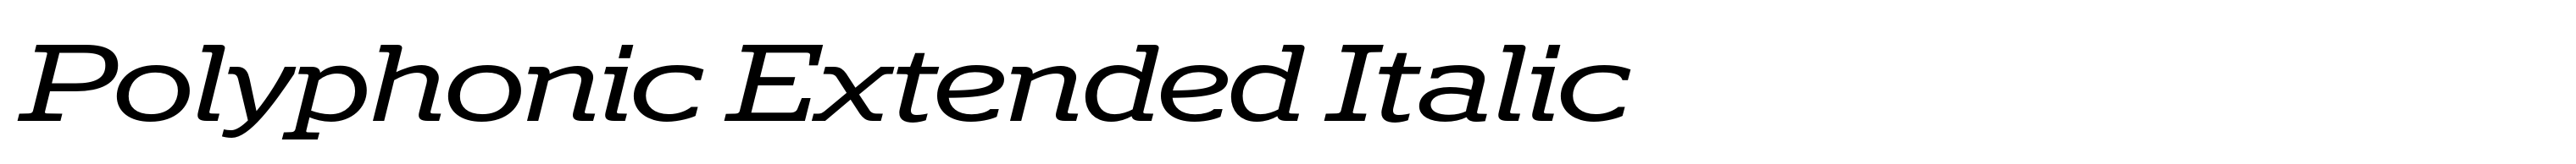 Polyphonic Extended Italic